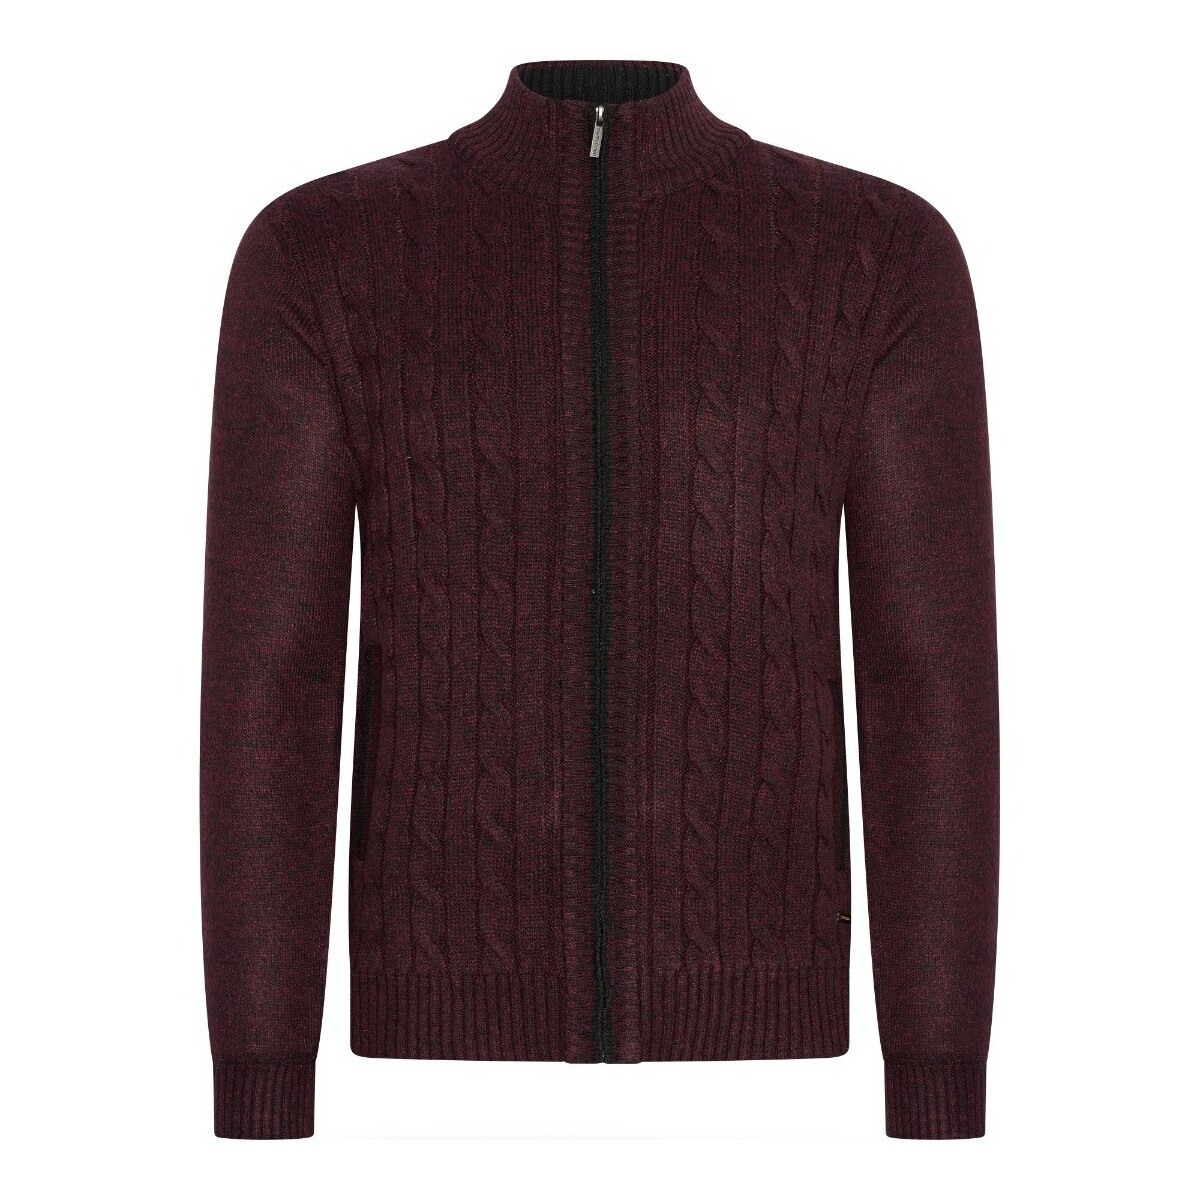 Vêtements Homme Sweats Cappuccino Italia Cable Cardigan Burgundy Rouge